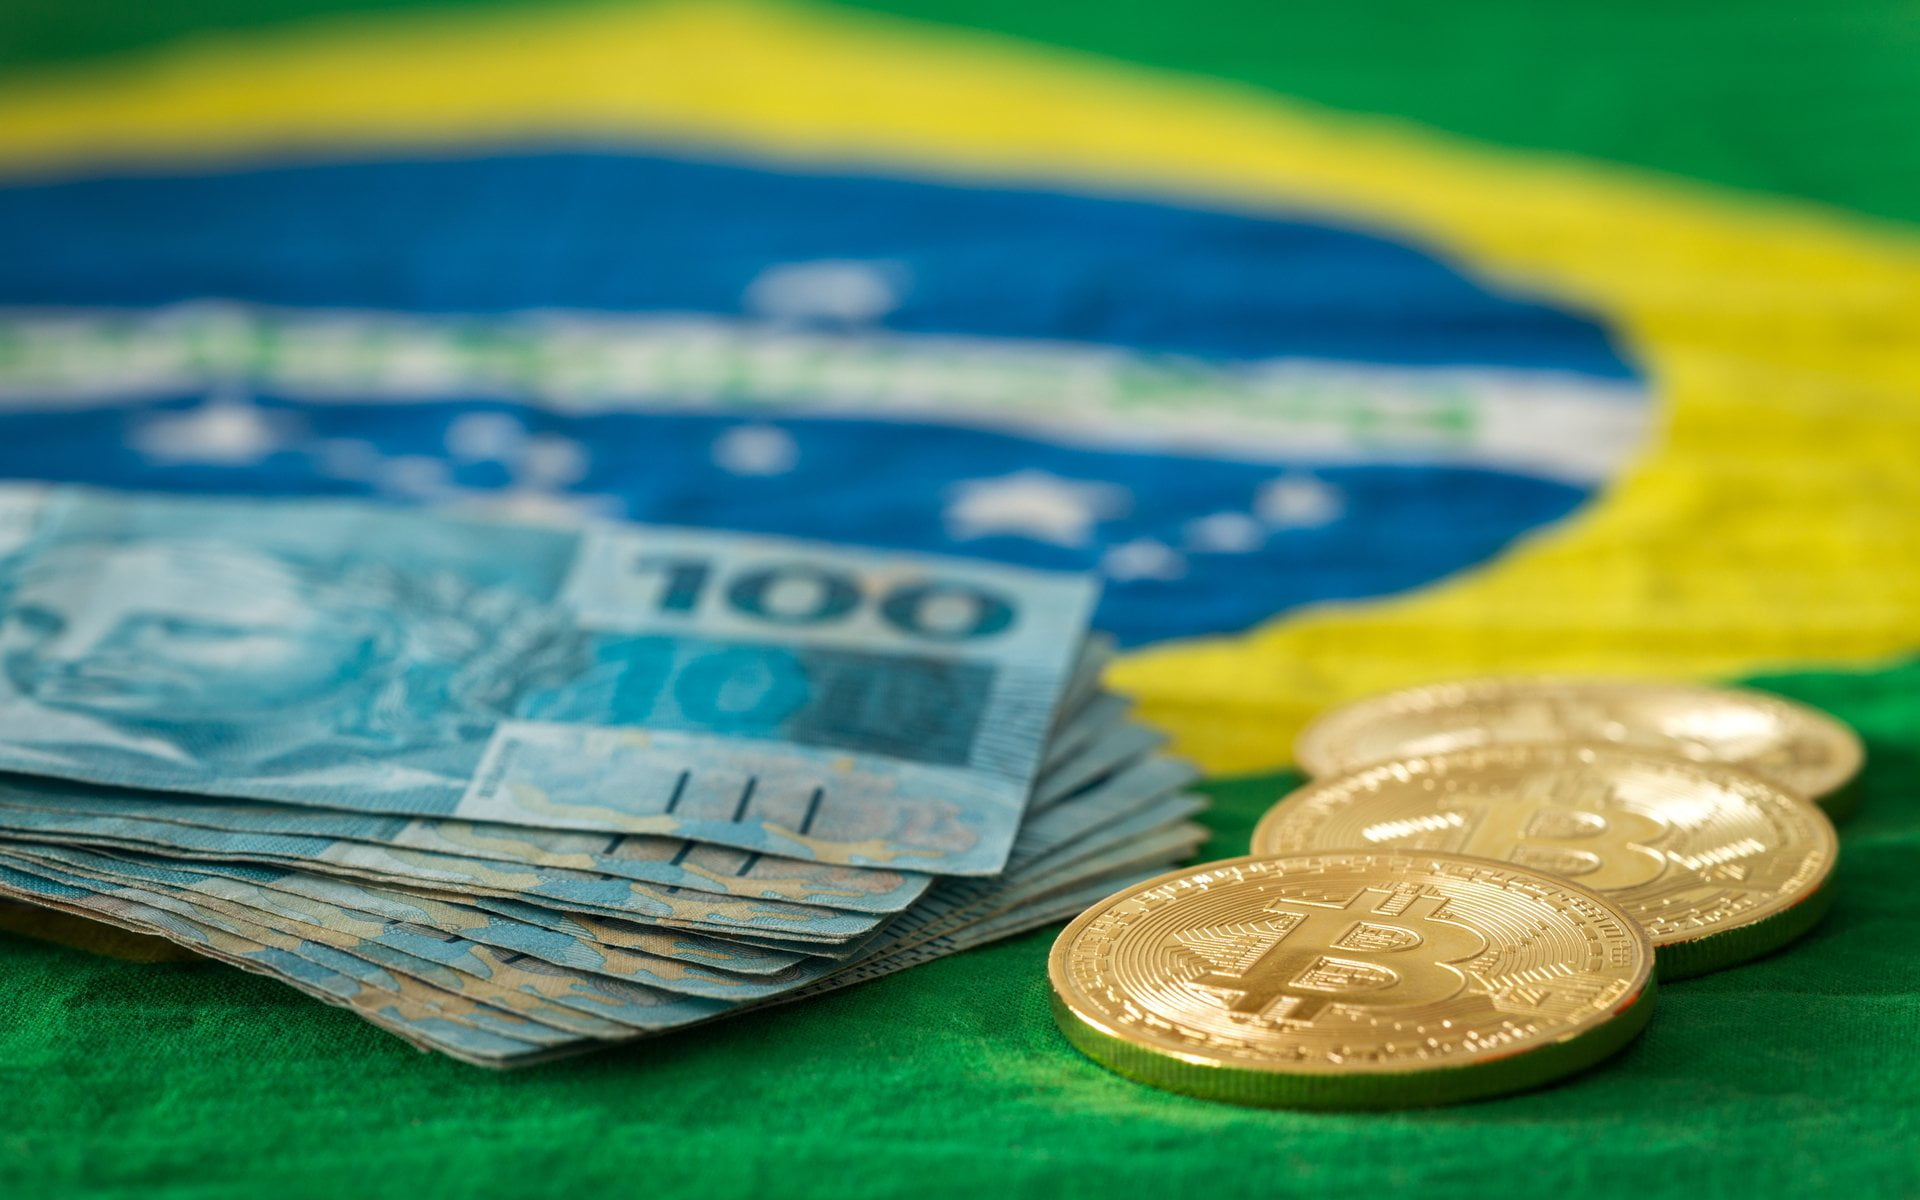 Brazil sees the backend tech of Bitcoin as a better payment system 13